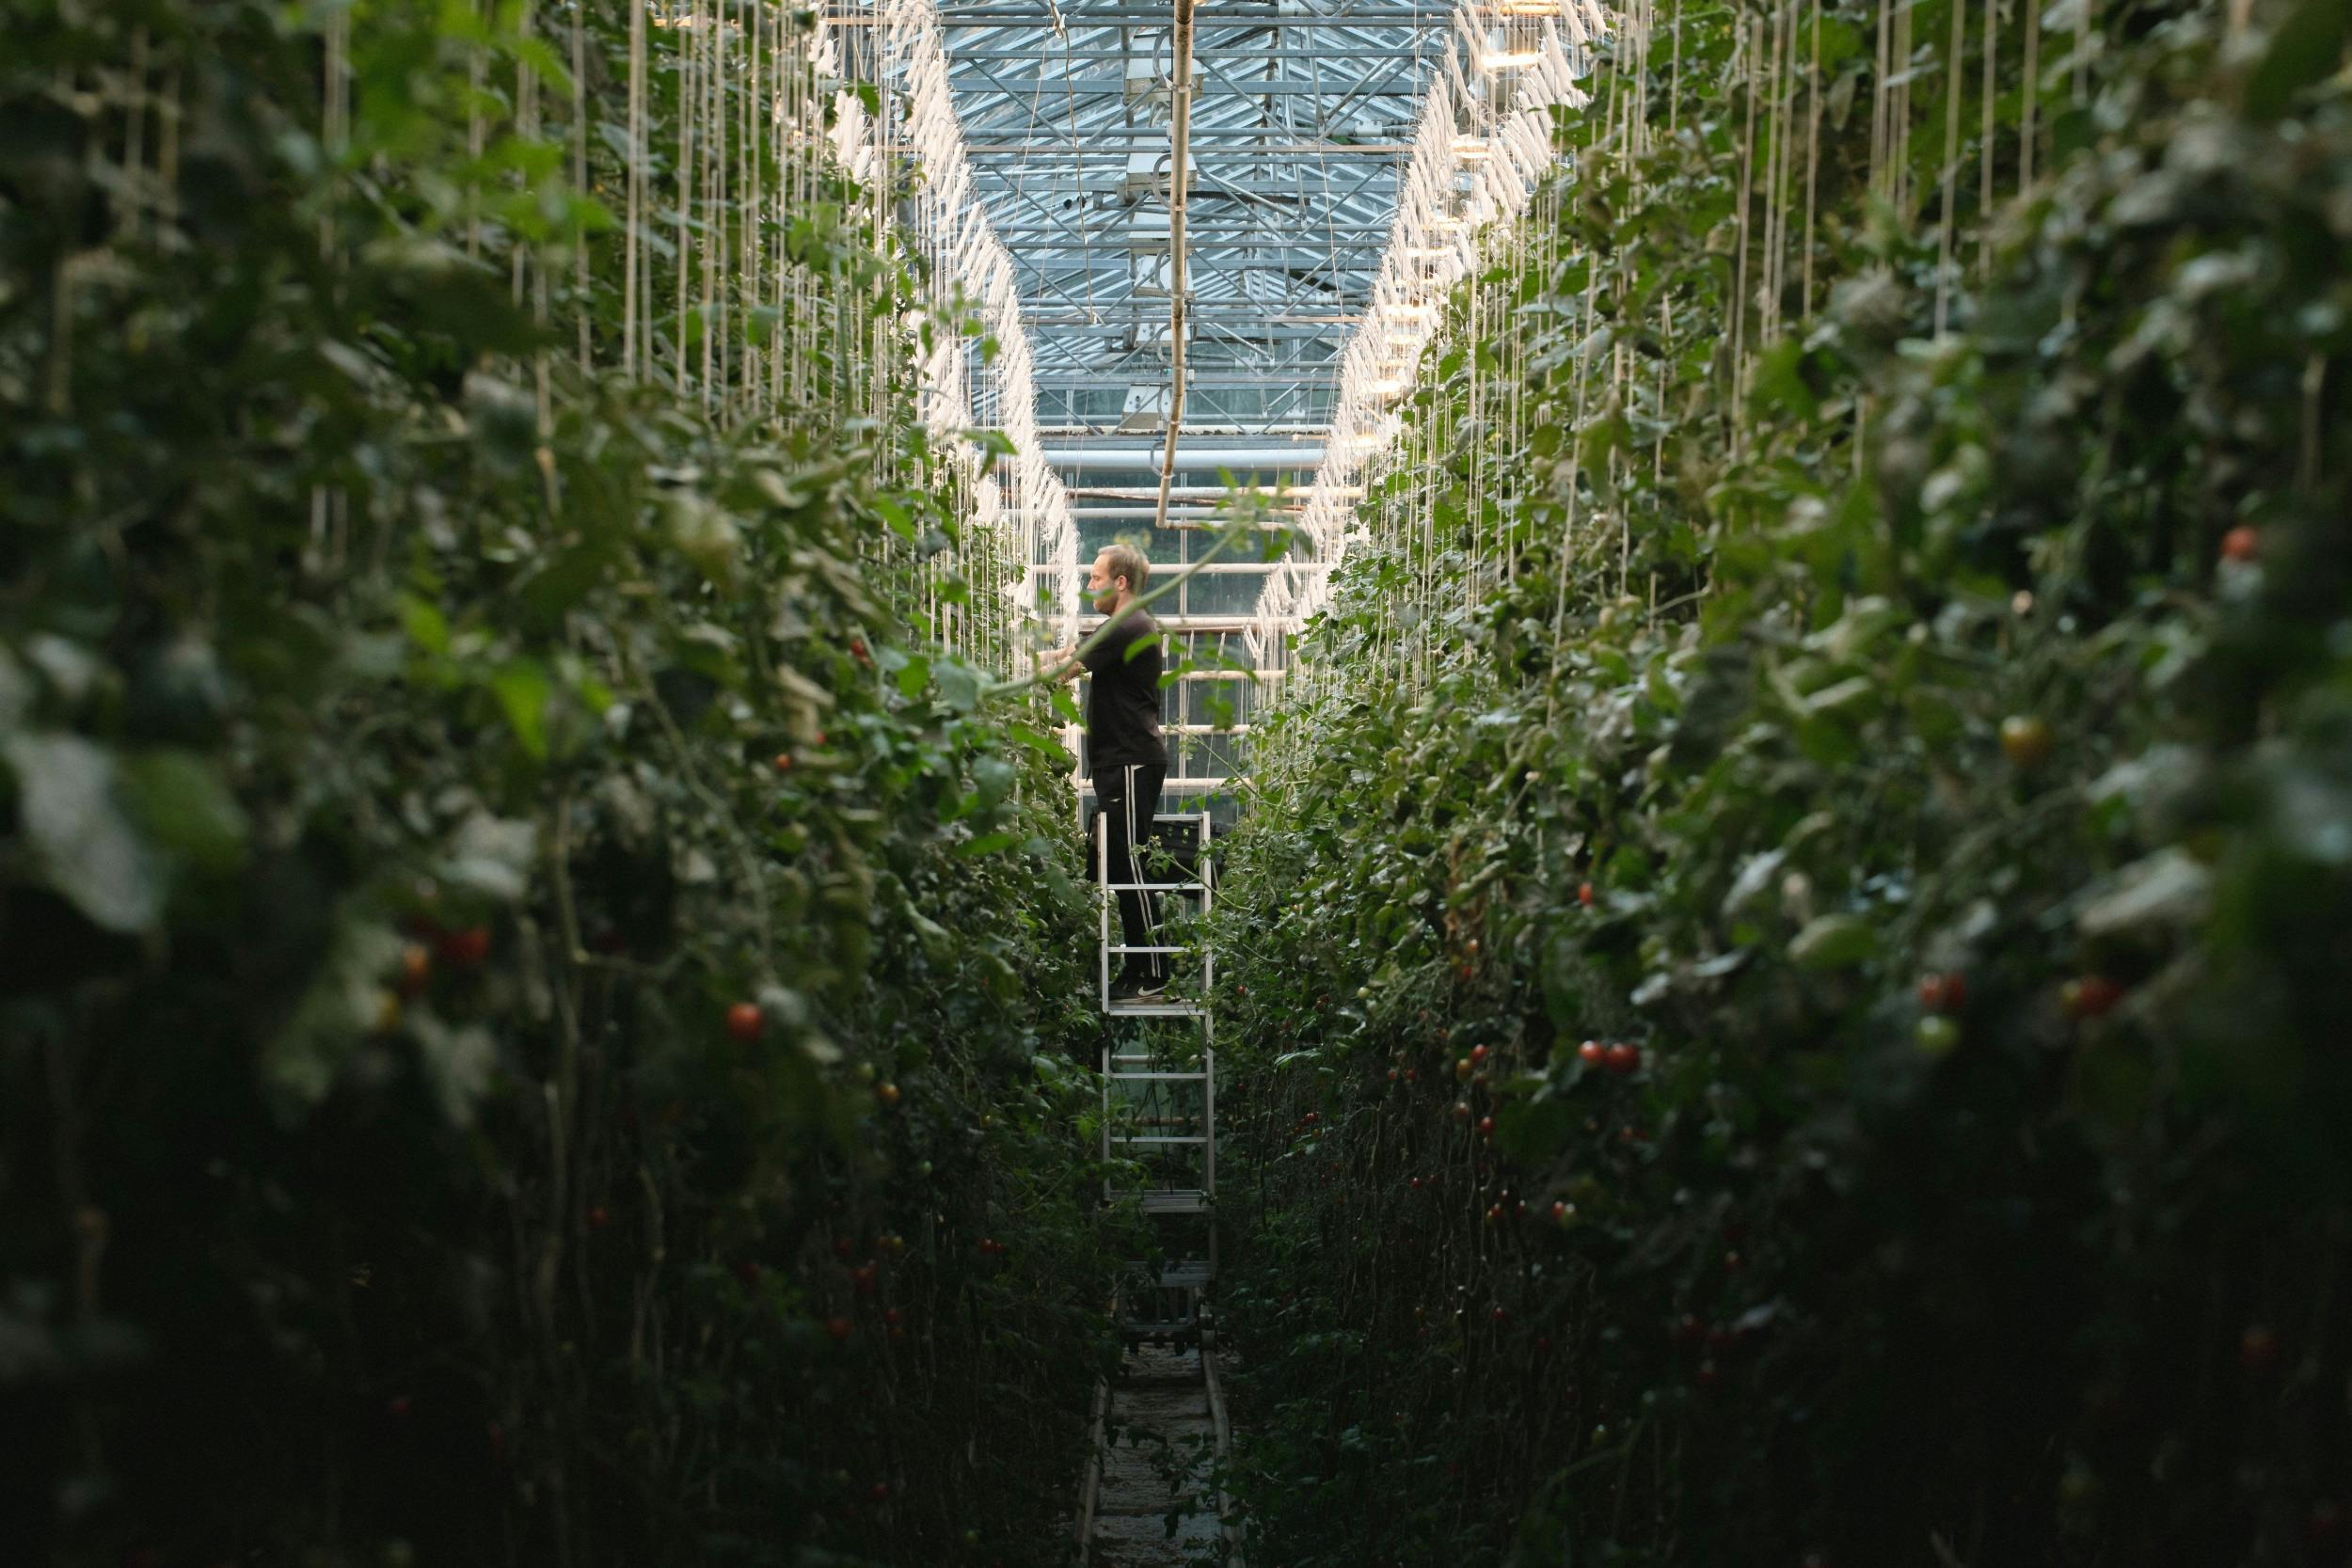 Tomato greehouse in Iceland